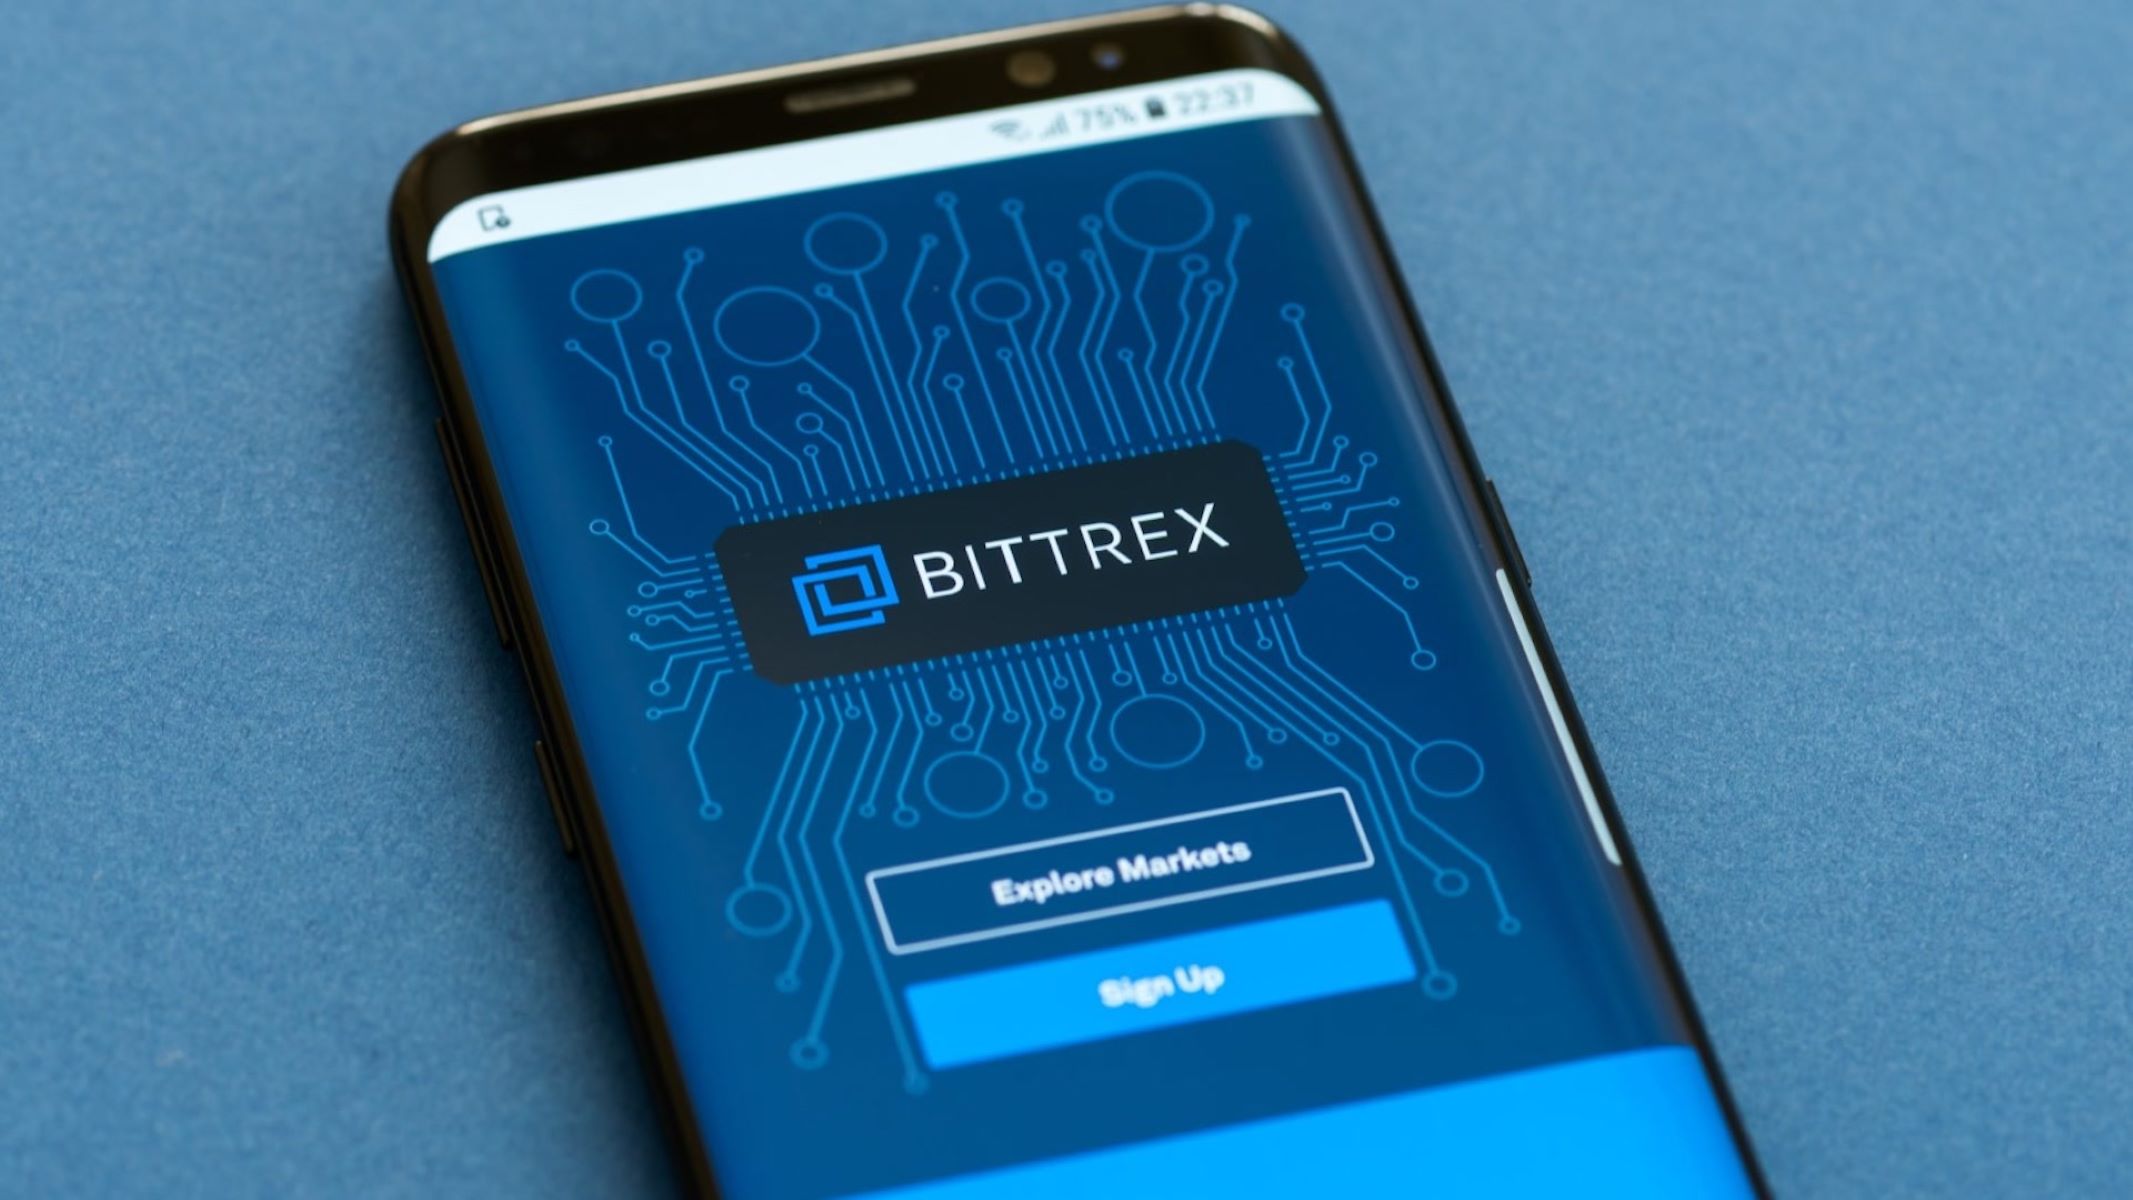 How To Transfer From Bittrex To A Hardware Wallet